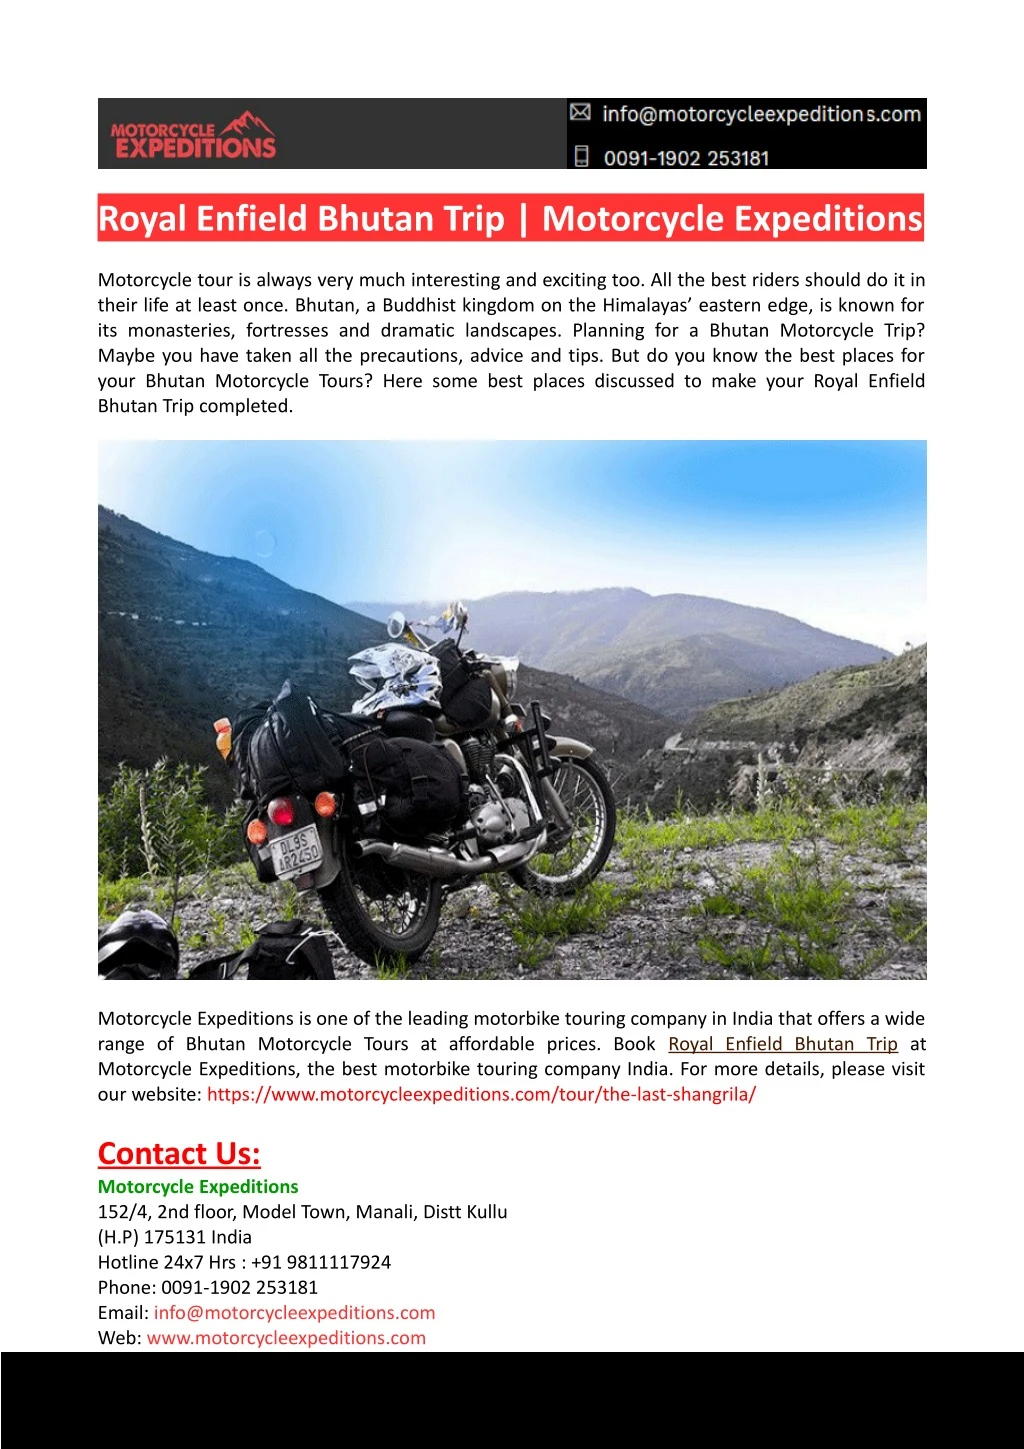 royal enfield bhutan trip motorcycle expeditions